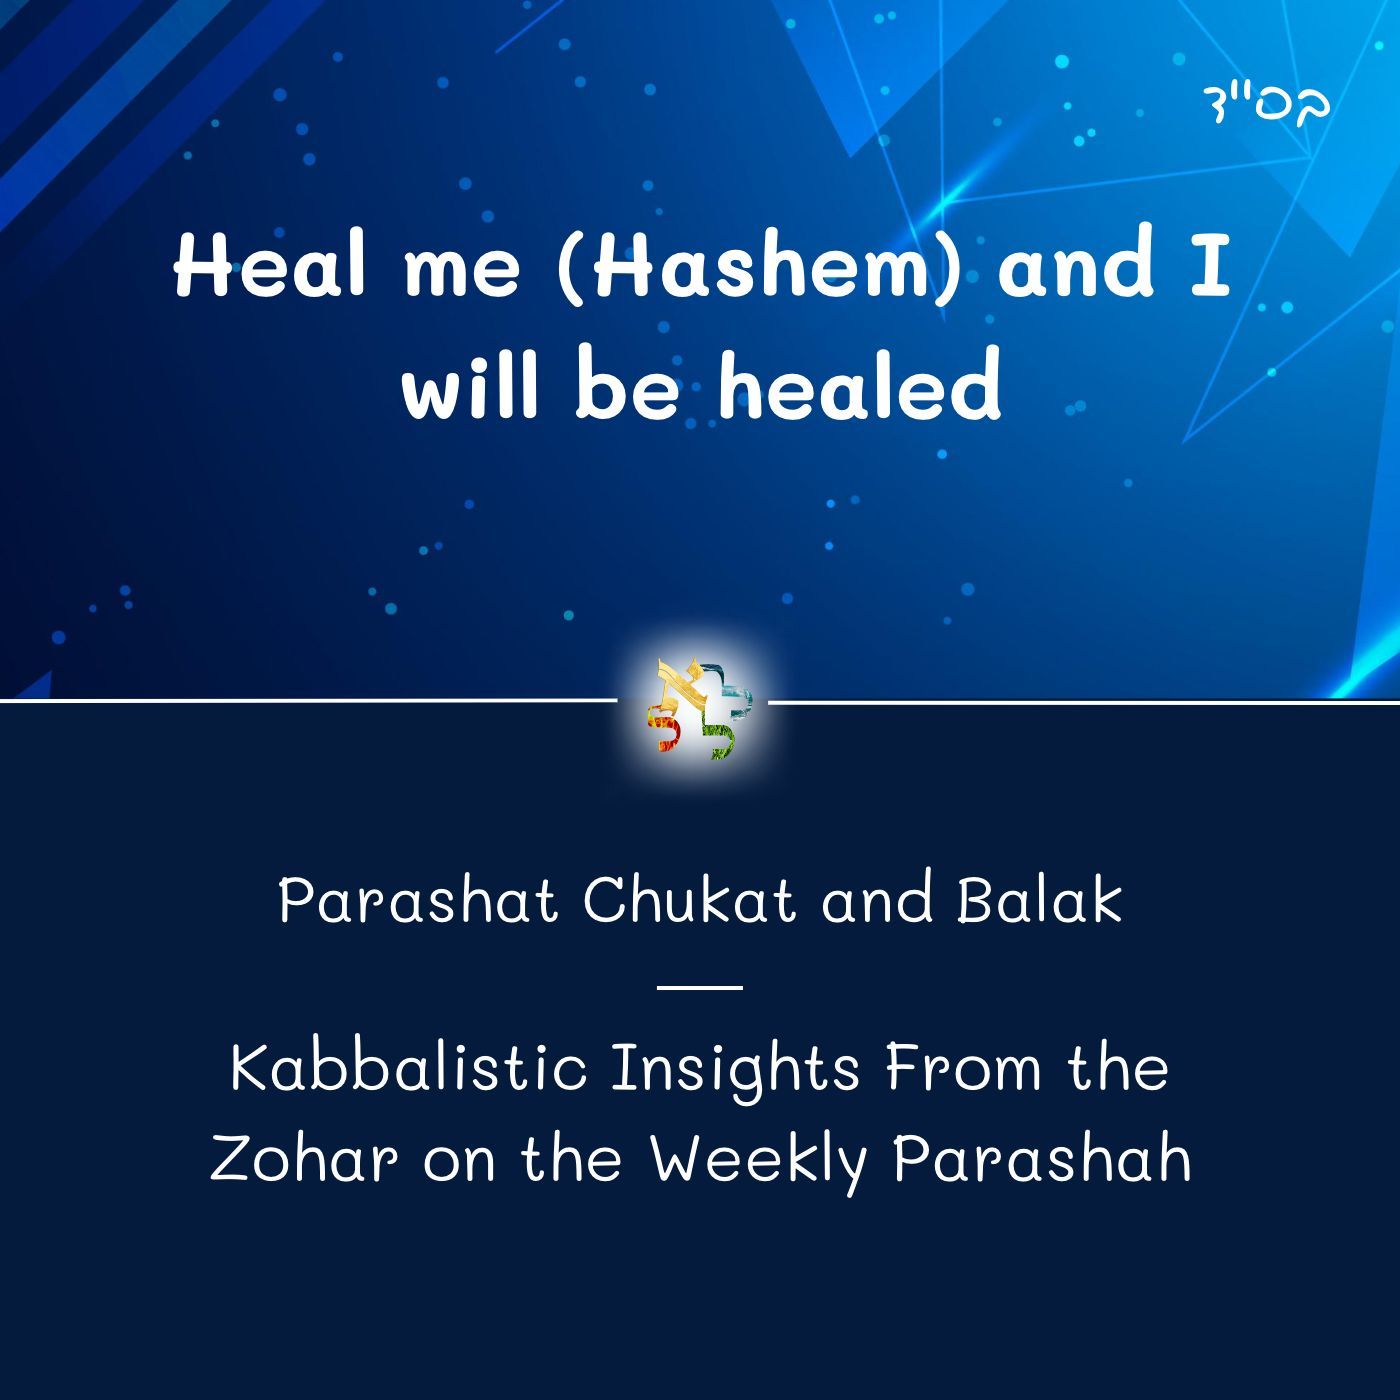 Heal me (Hashem) and I will be healed - Kabbalistic Inspiration on the Parasha from the Zohar